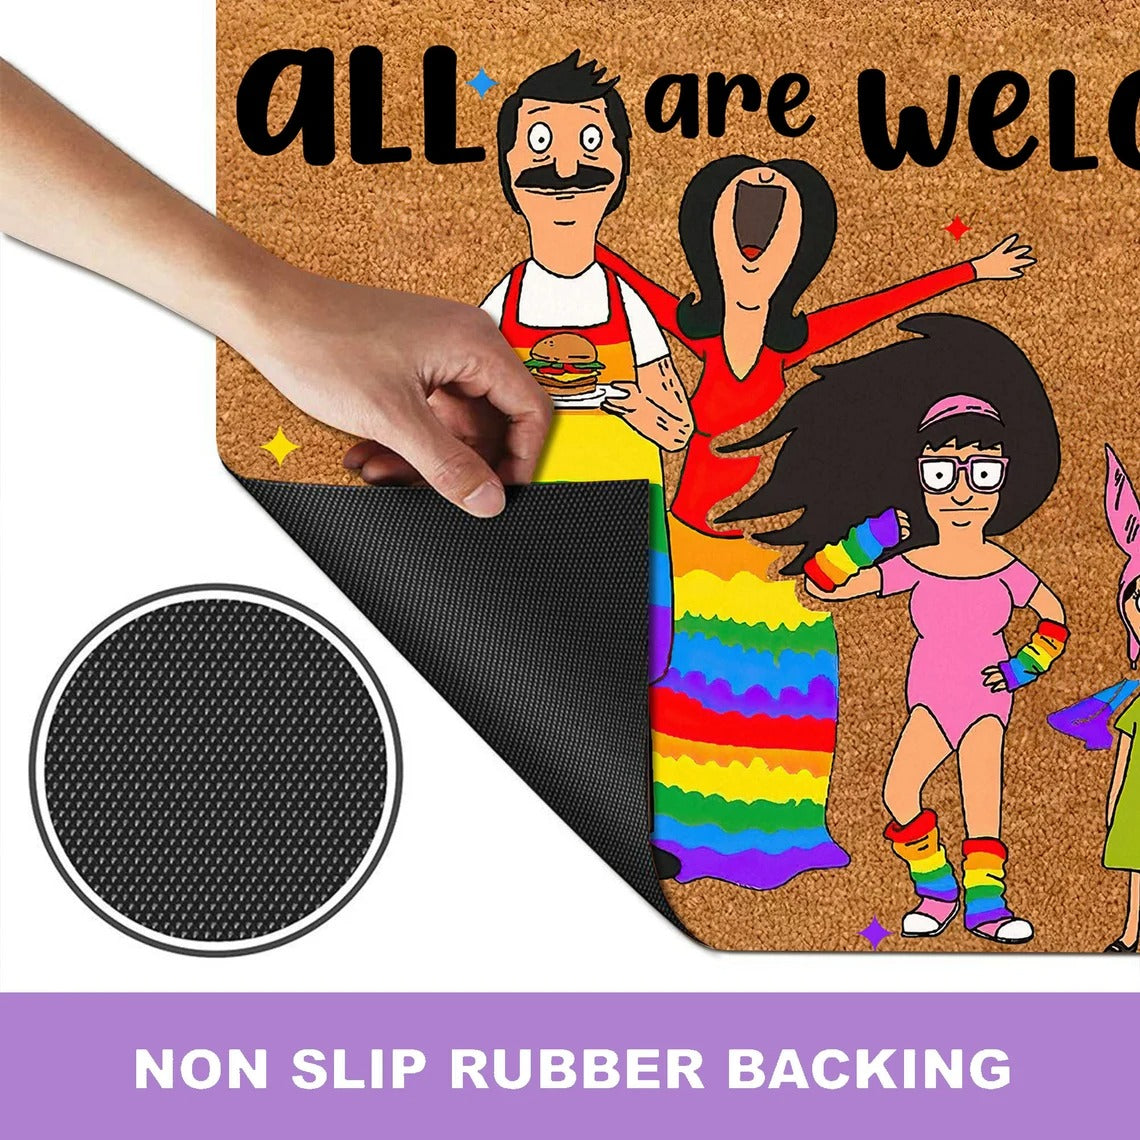 Pride Doormat Lgbt All Are Welcome Here Doormat/ Lgbt Gay Pride Home Decor/ Lgbt Family Welcome Doormat